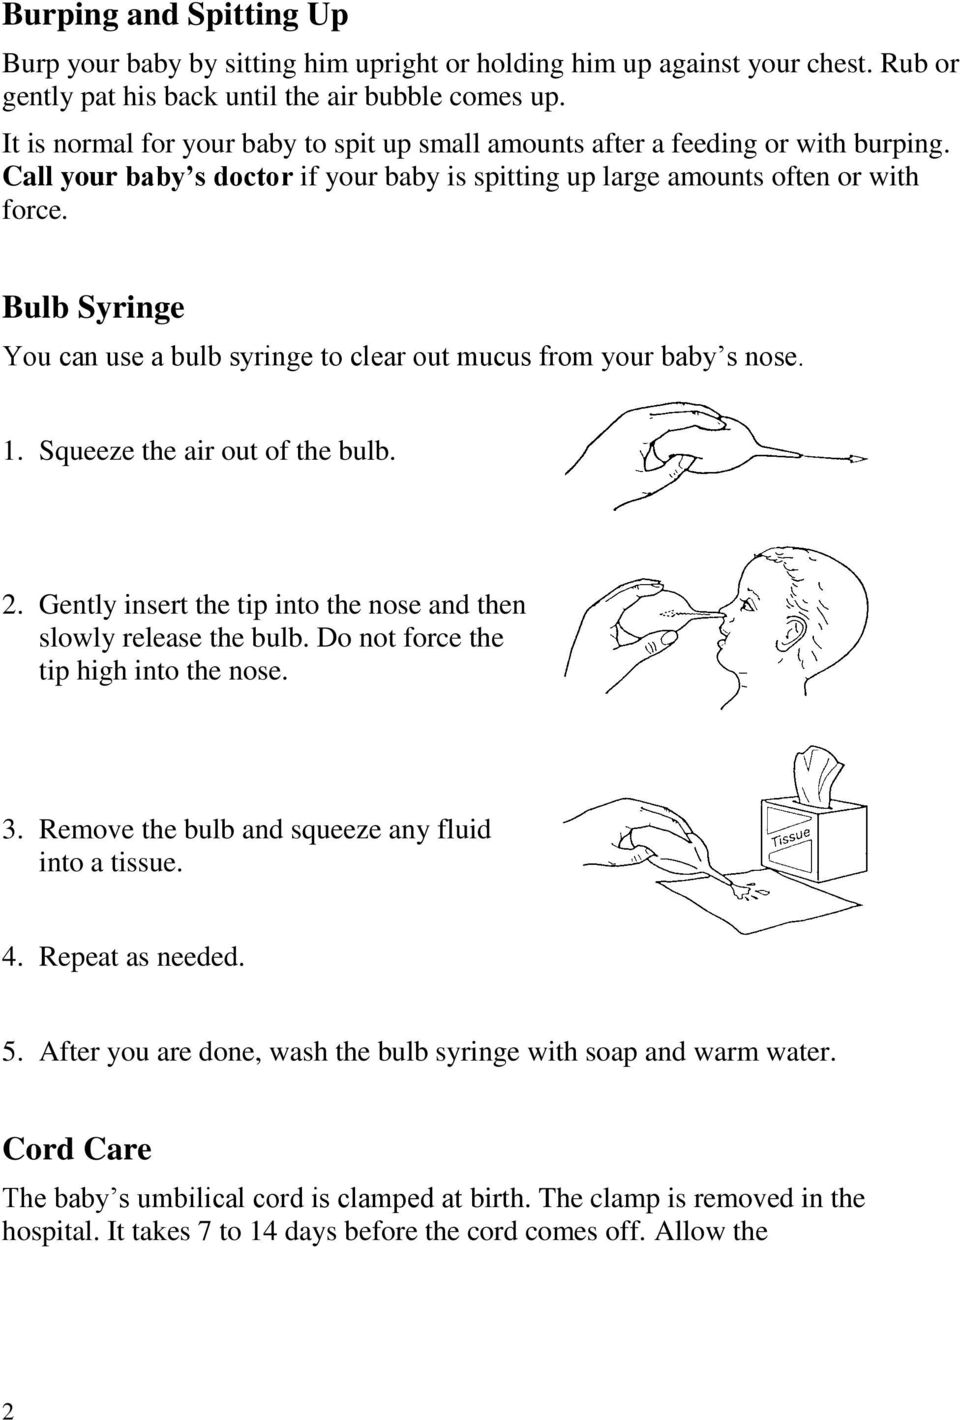 Bulb Syringe You can use a bulb syringe to clear out mucus from your baby s nose. 1. Squeeze the air out of the bulb. 2. Gently insert the tip into the nose and then slowly release the bulb.